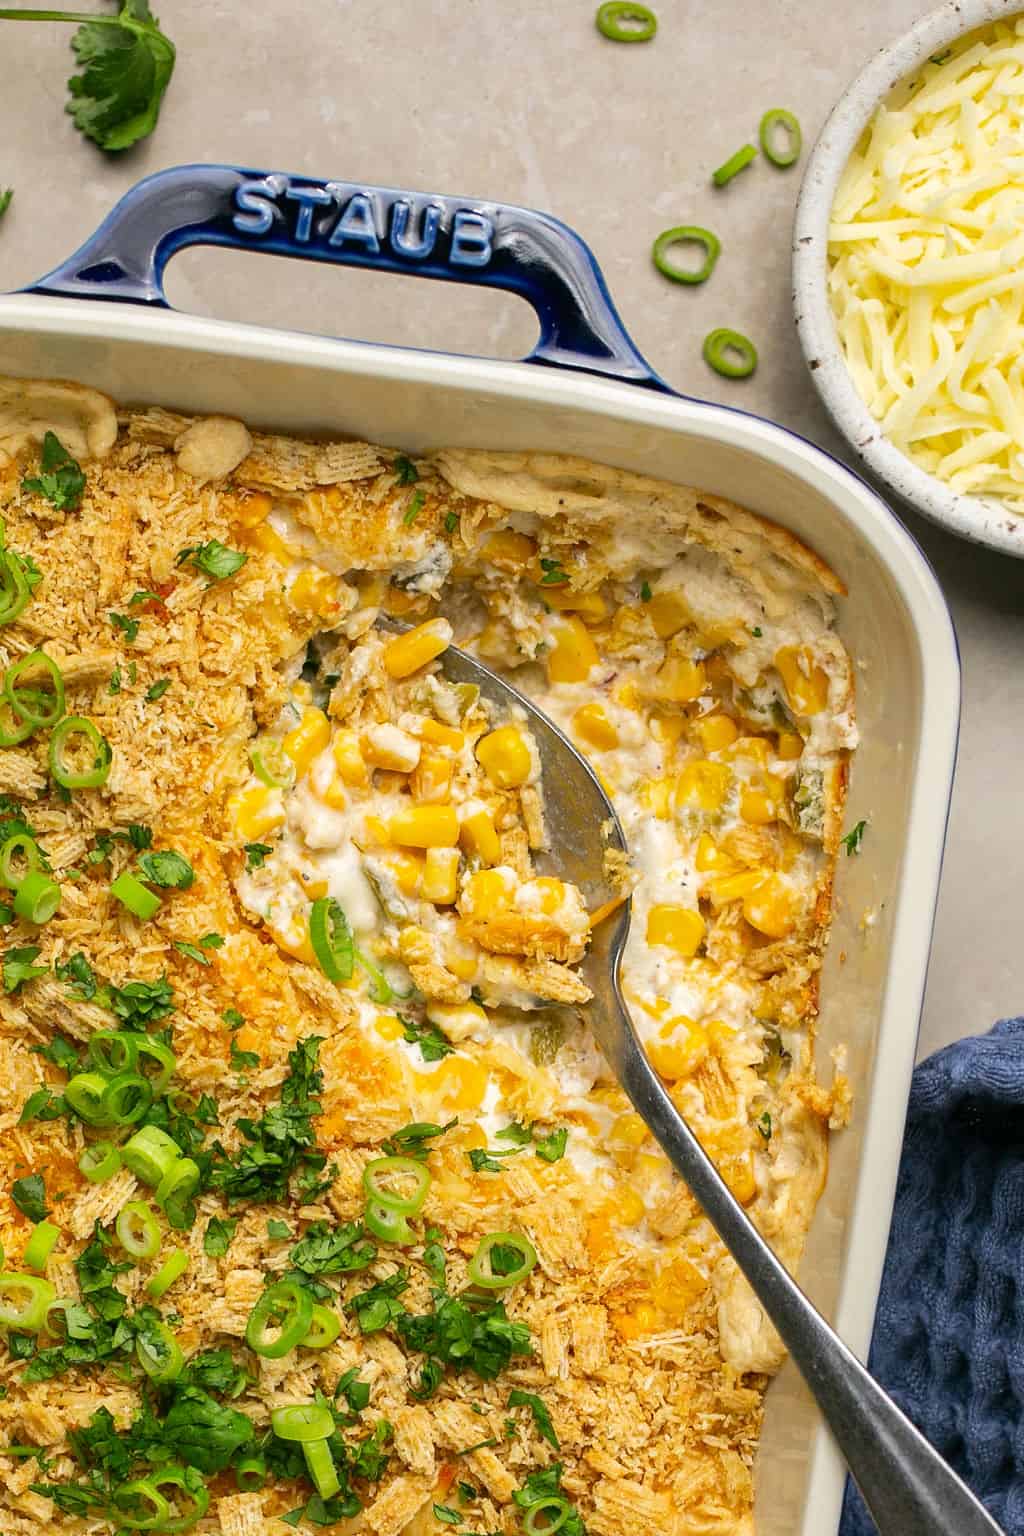 Spoon in the casserole and cheese off to the side.